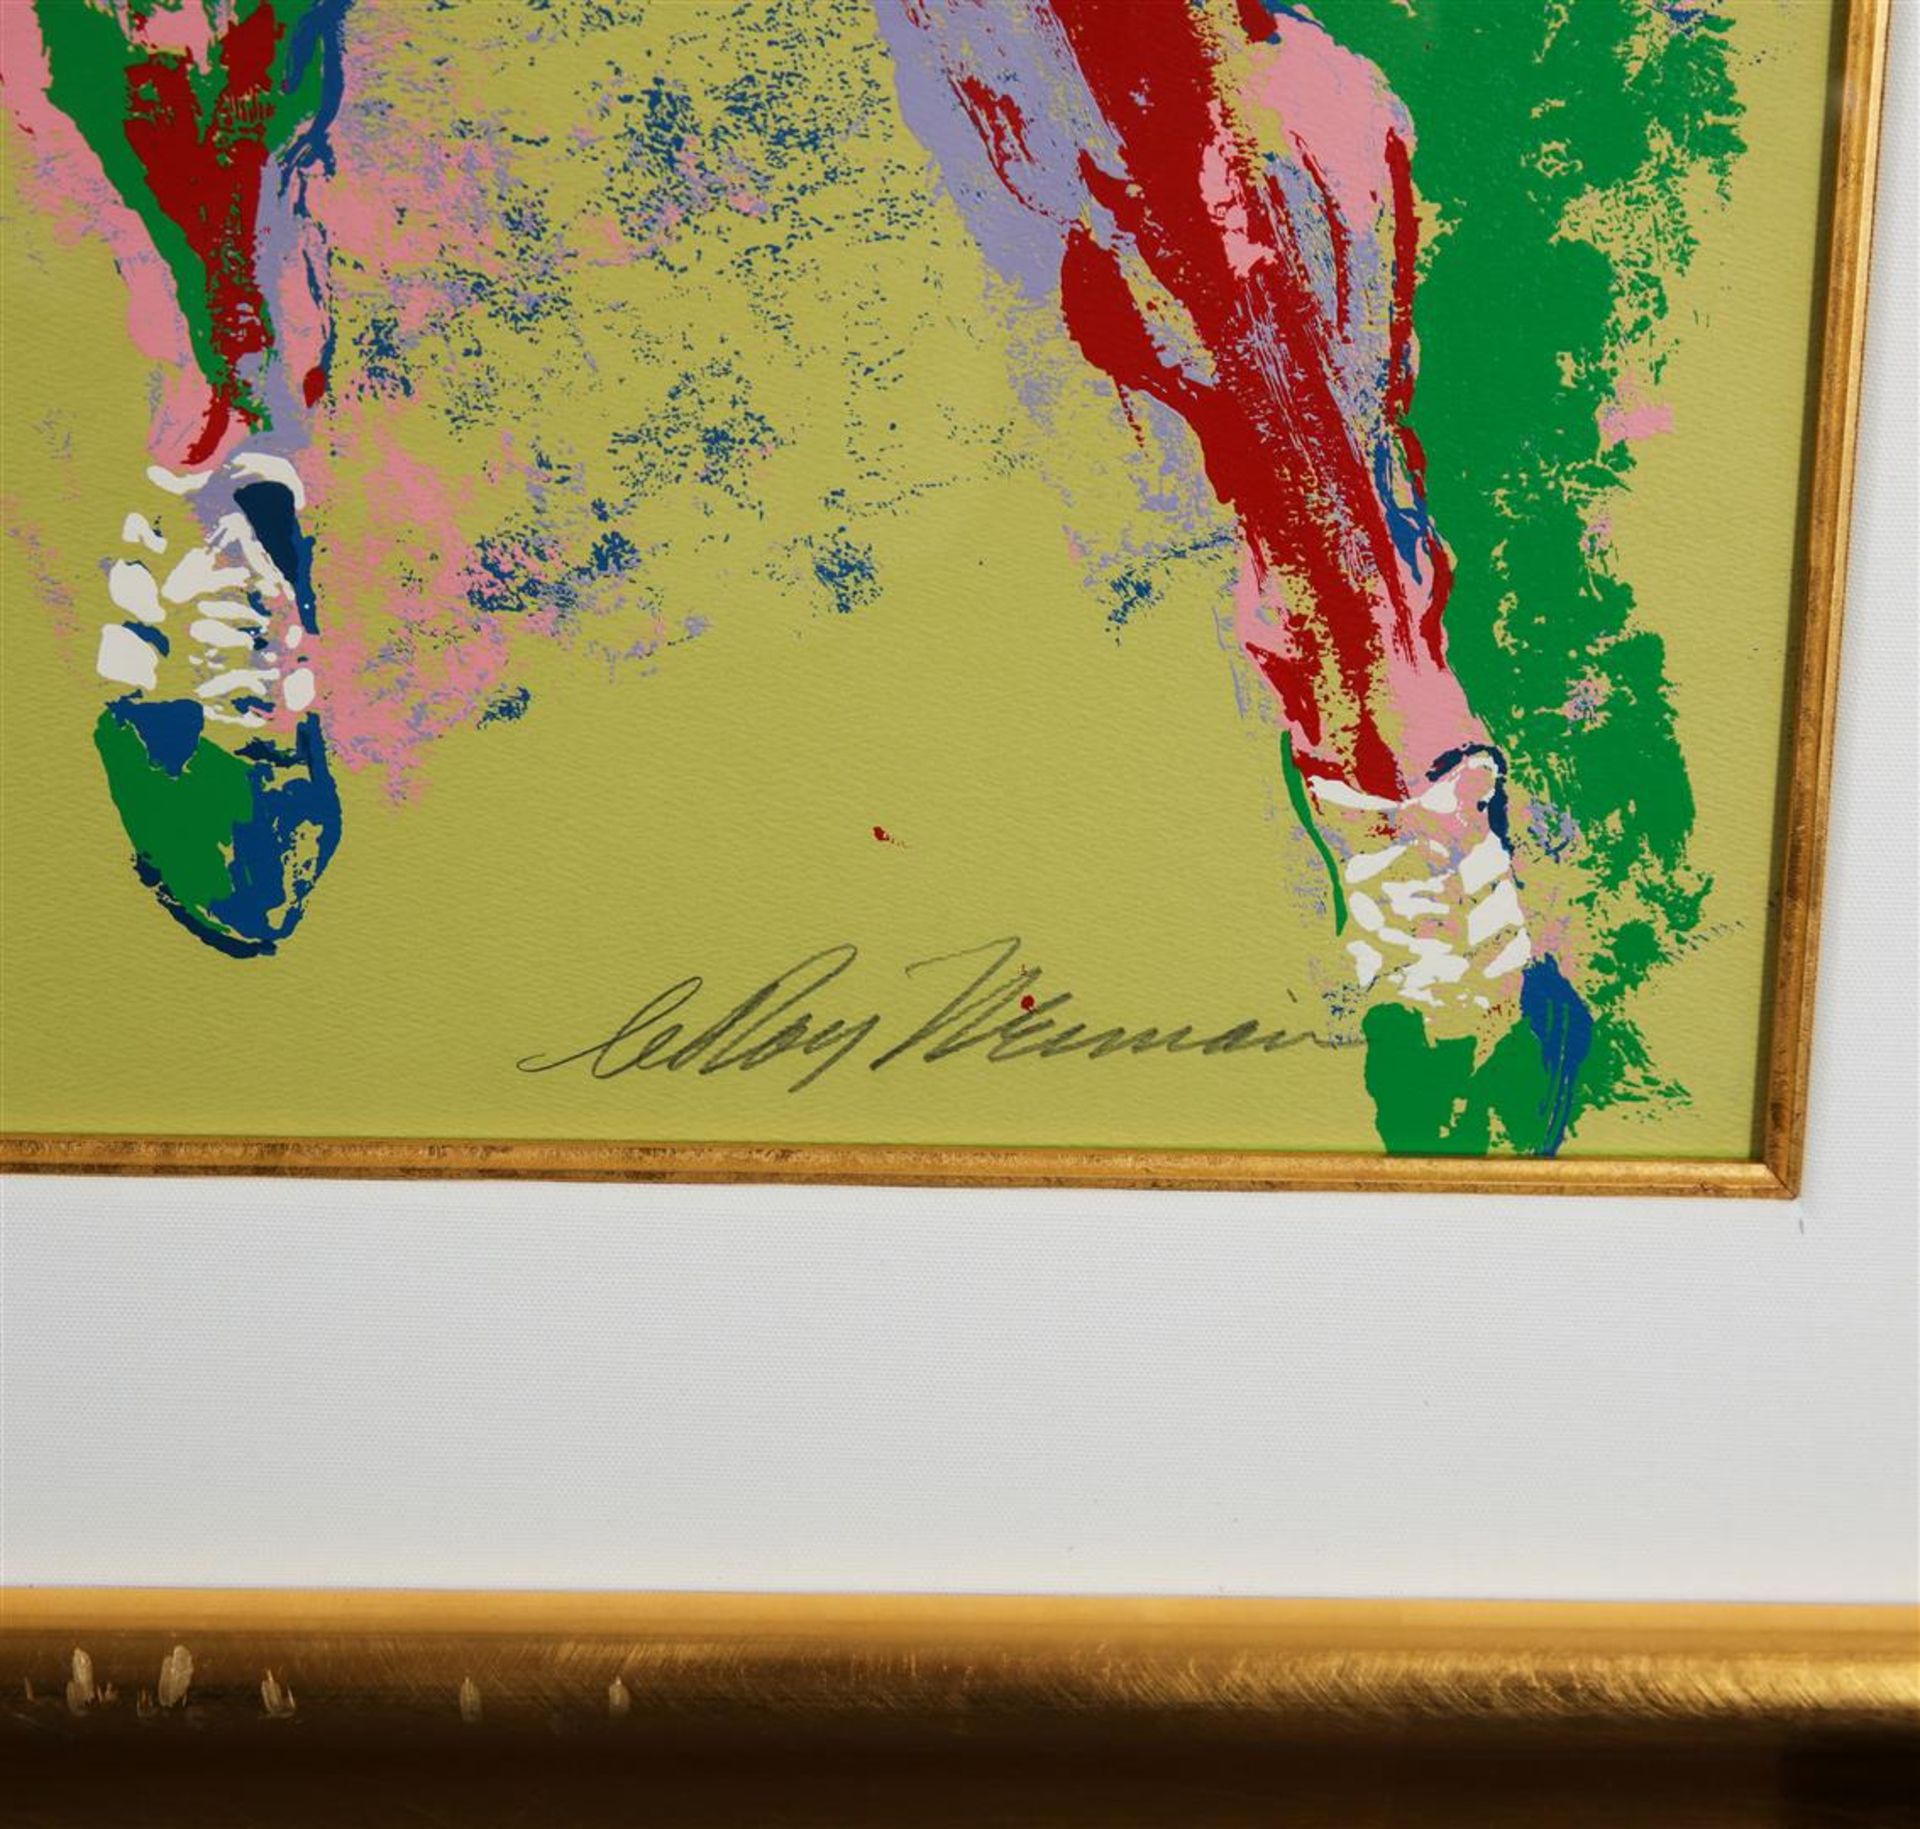 "Olympic Runner" by LeRoy Neiman - Limited Edition Serigraph - Image 3 of 4